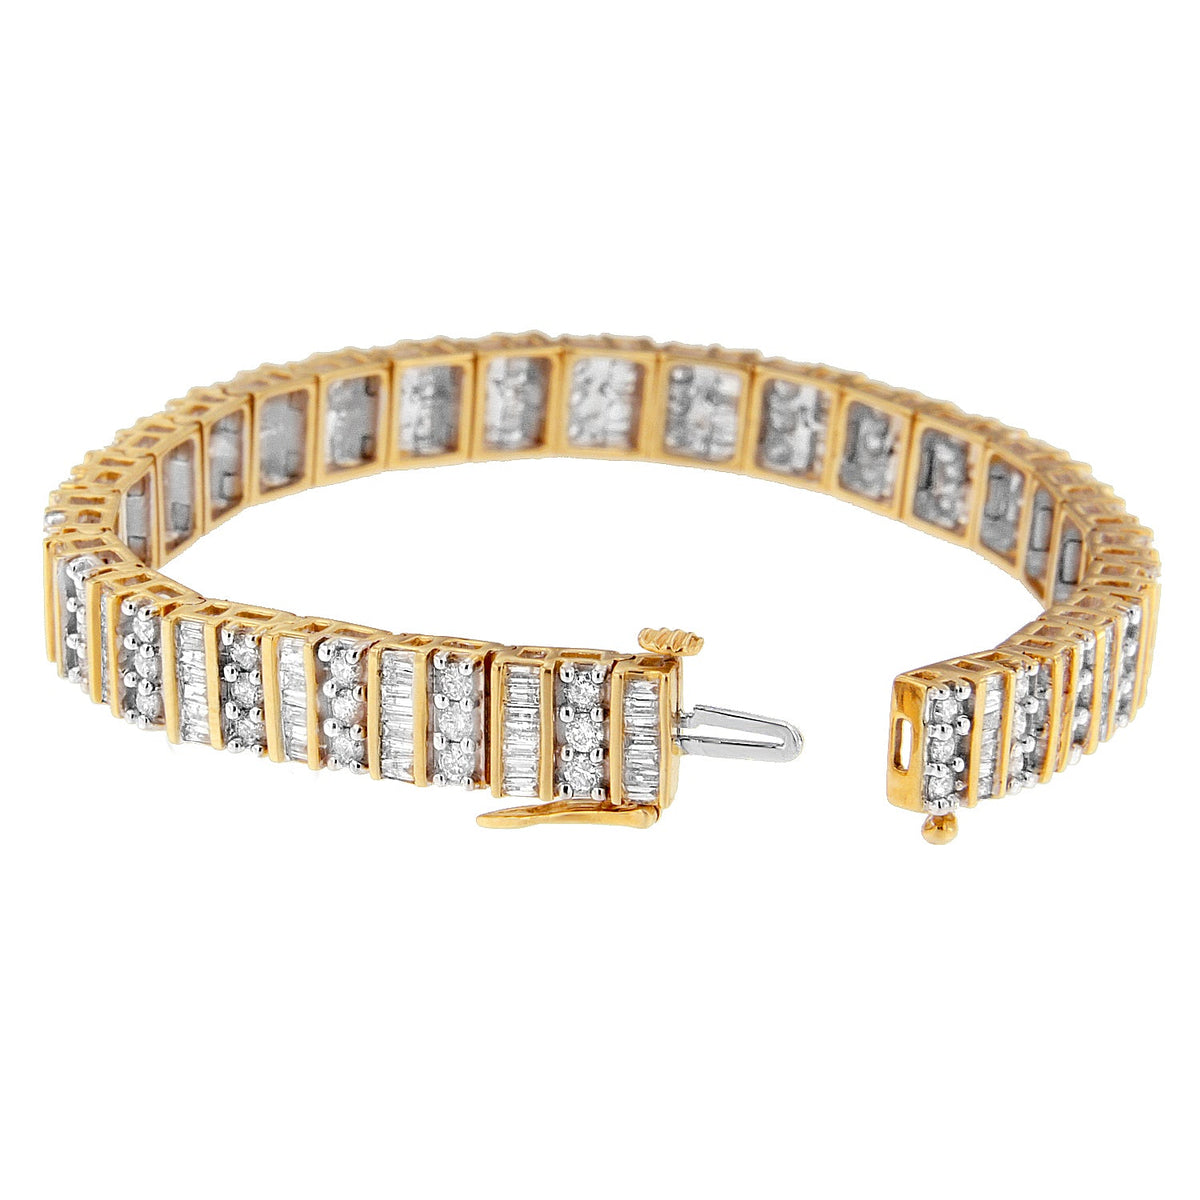 14K Yellow Gold Round and Baguette-Cut Diamond Bracelet (5.50 cttw, H-I Color, I1-I2 Clarity) - LinkagejewelrydesignLinkagejewelrydesign